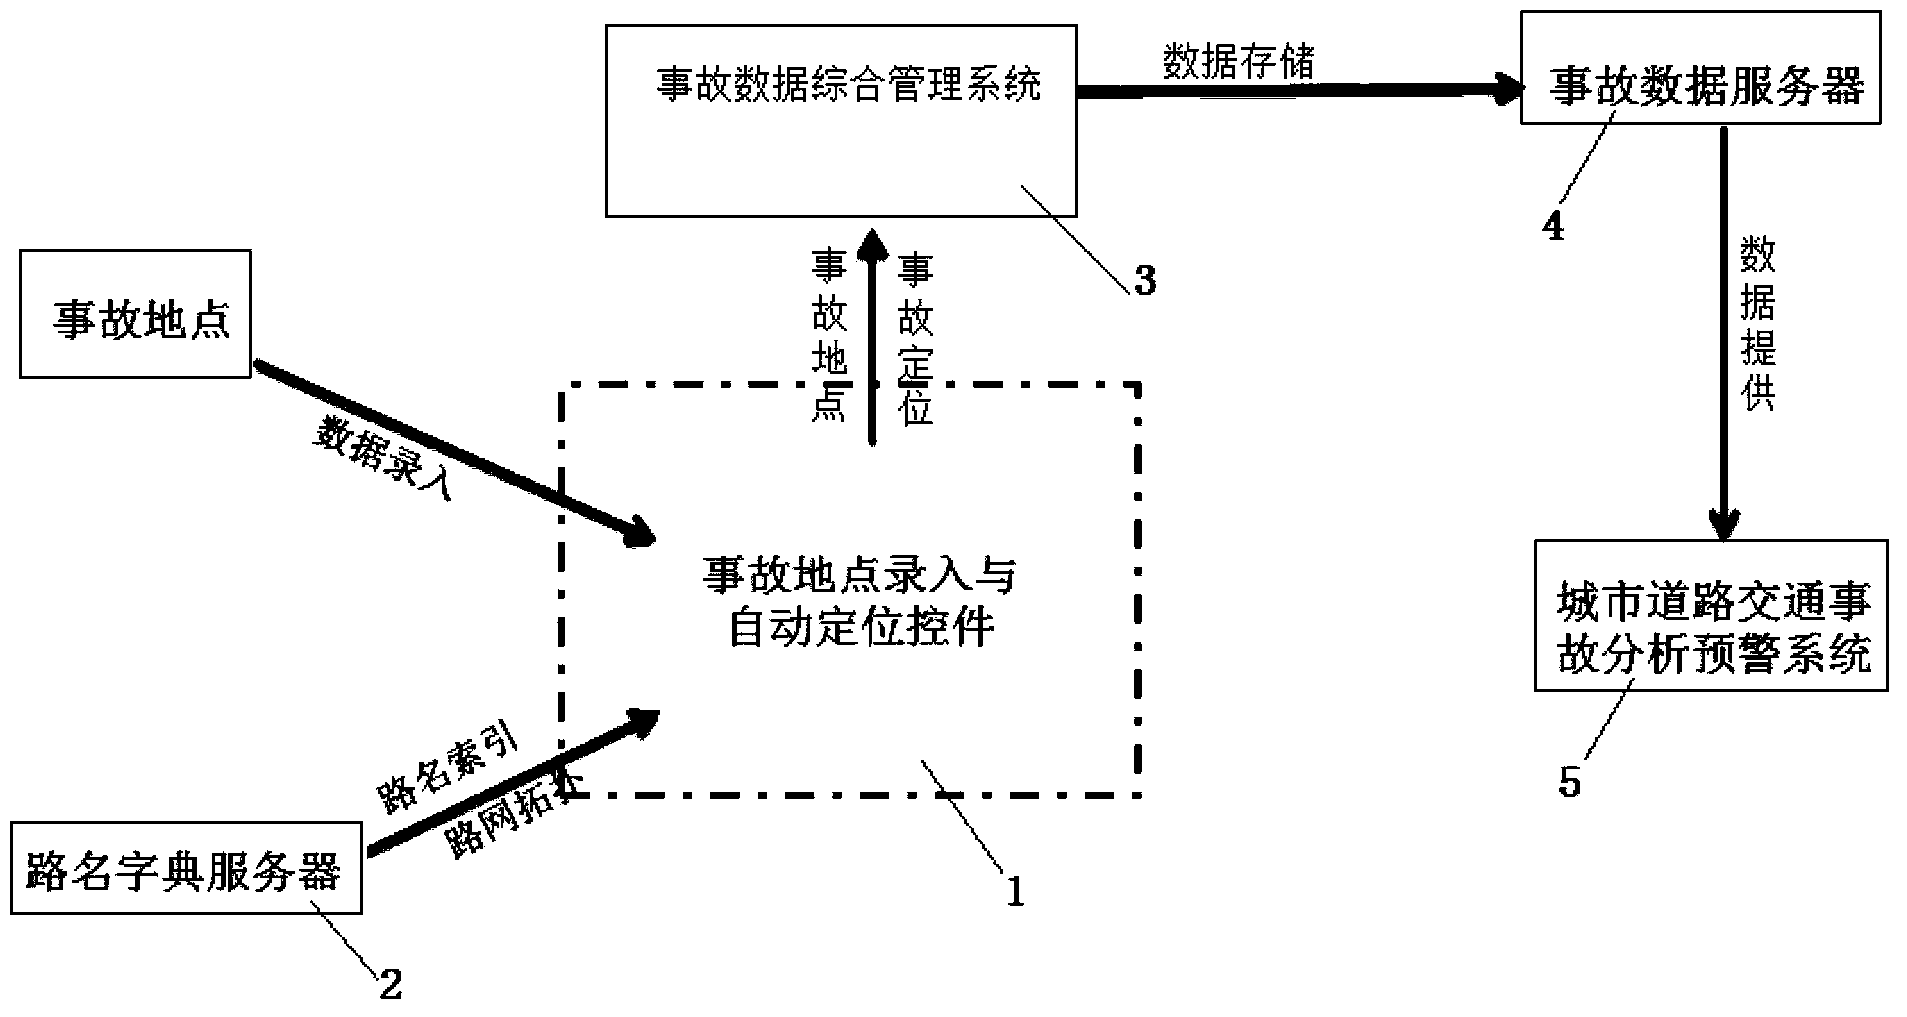 Method for automatically recording and positioning semantic expression information of traffic accident site